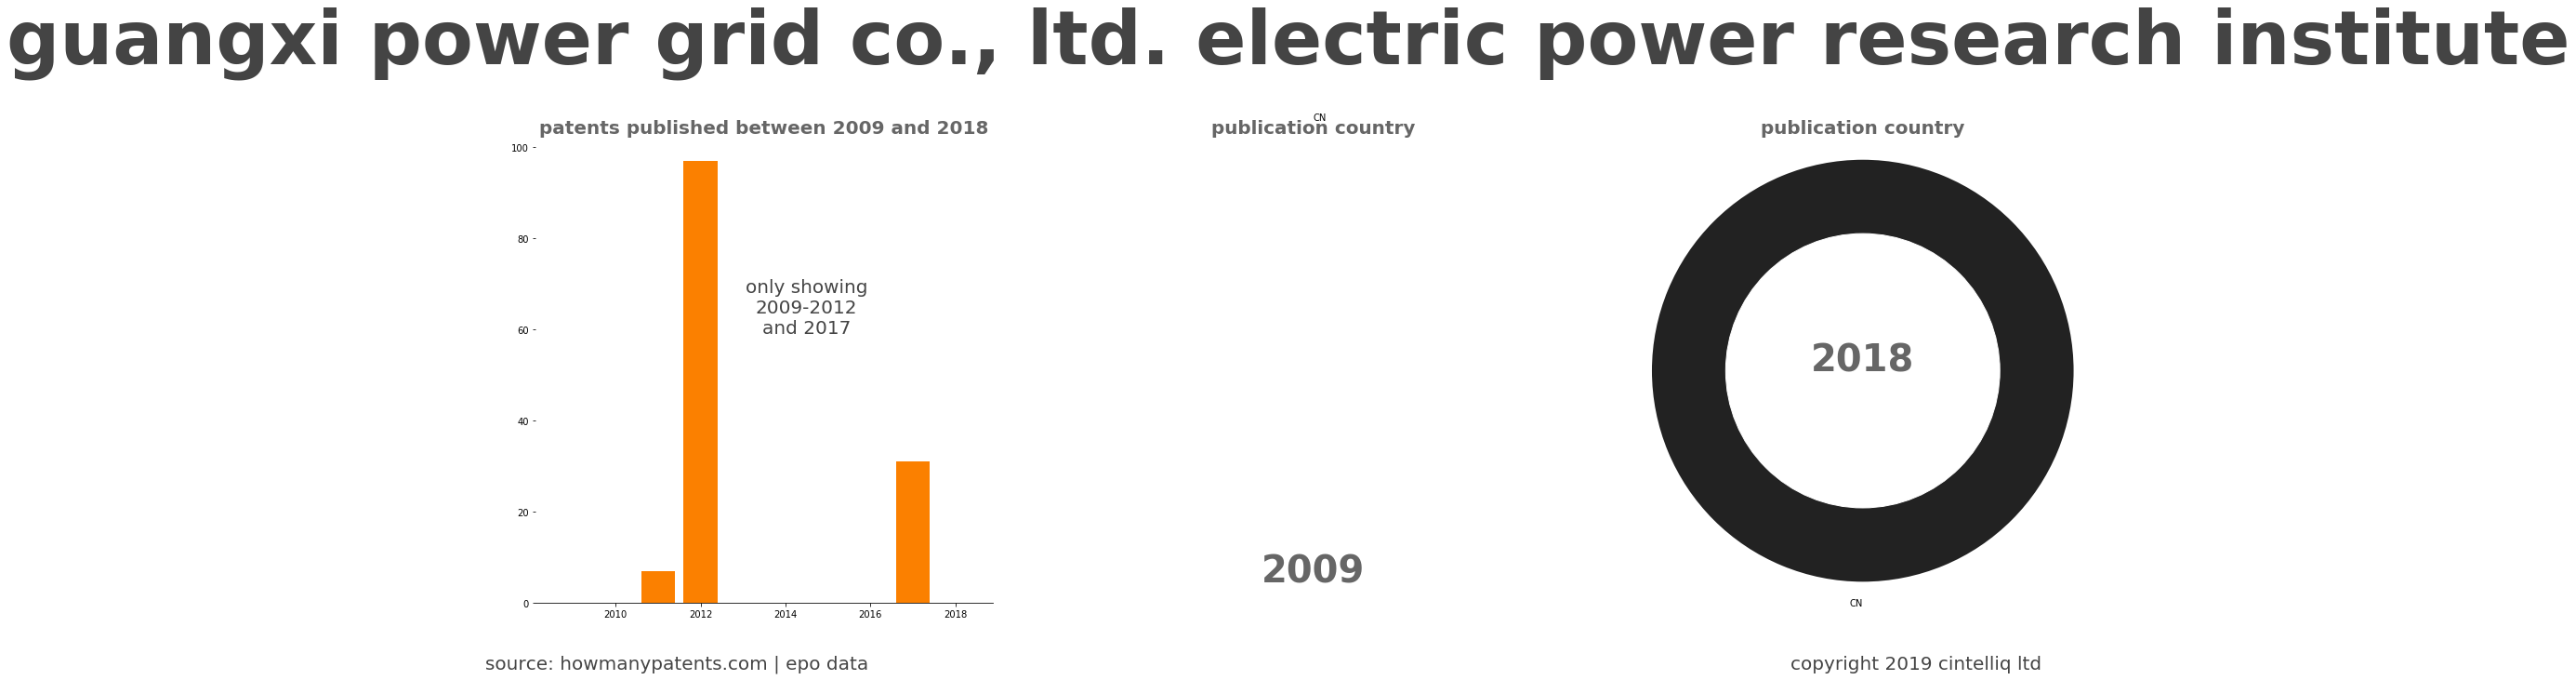 summary of patents for Guangxi Power Grid Co., Ltd. Electric Power Research Institute